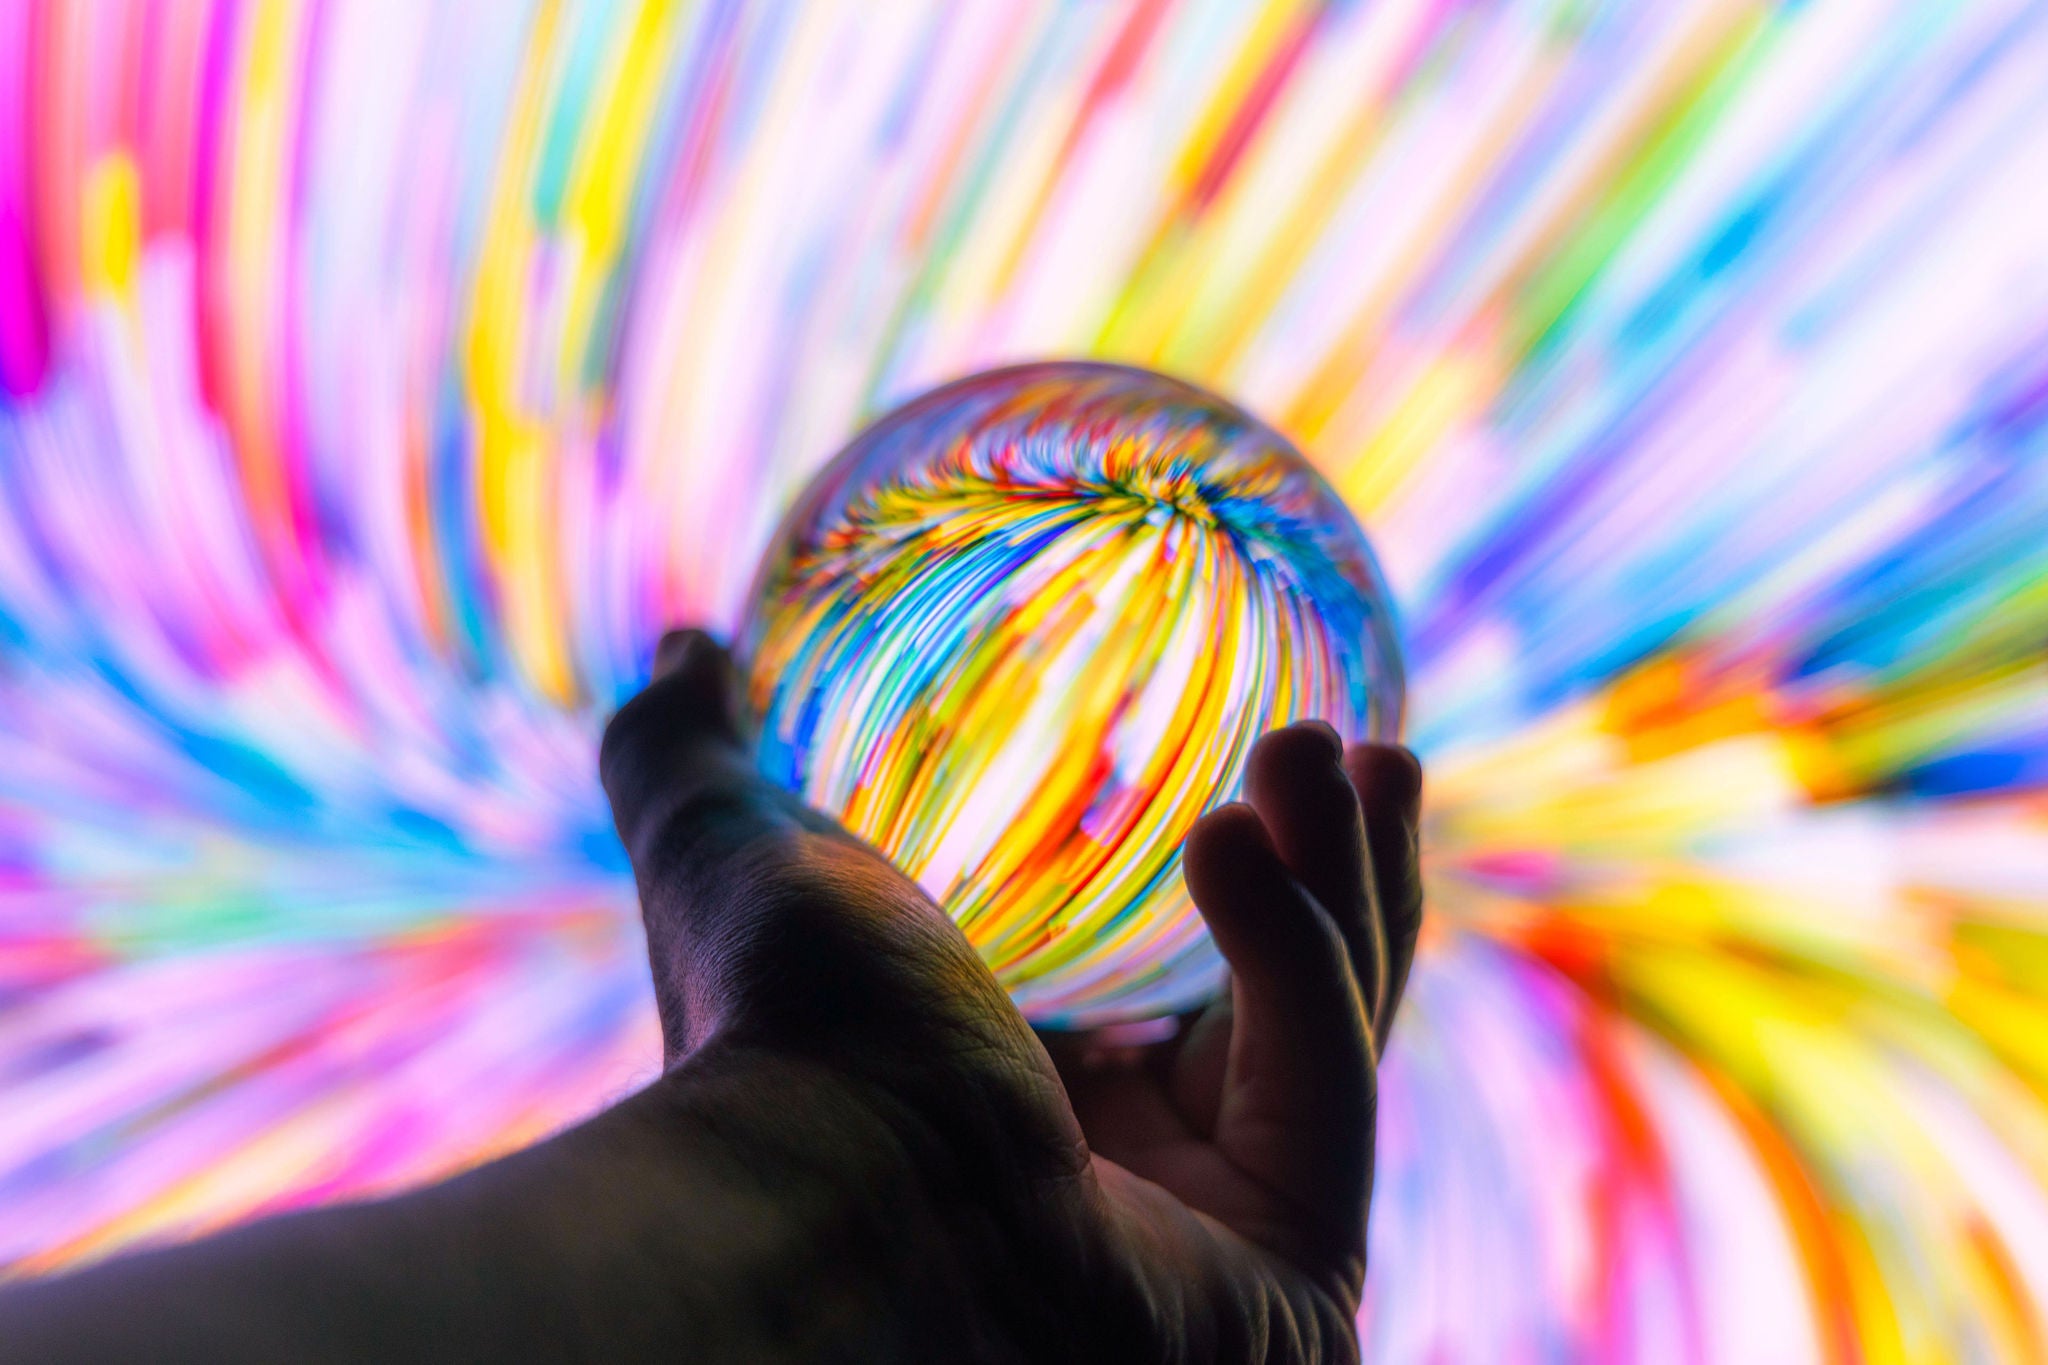 man holding a glass ball against colorful background